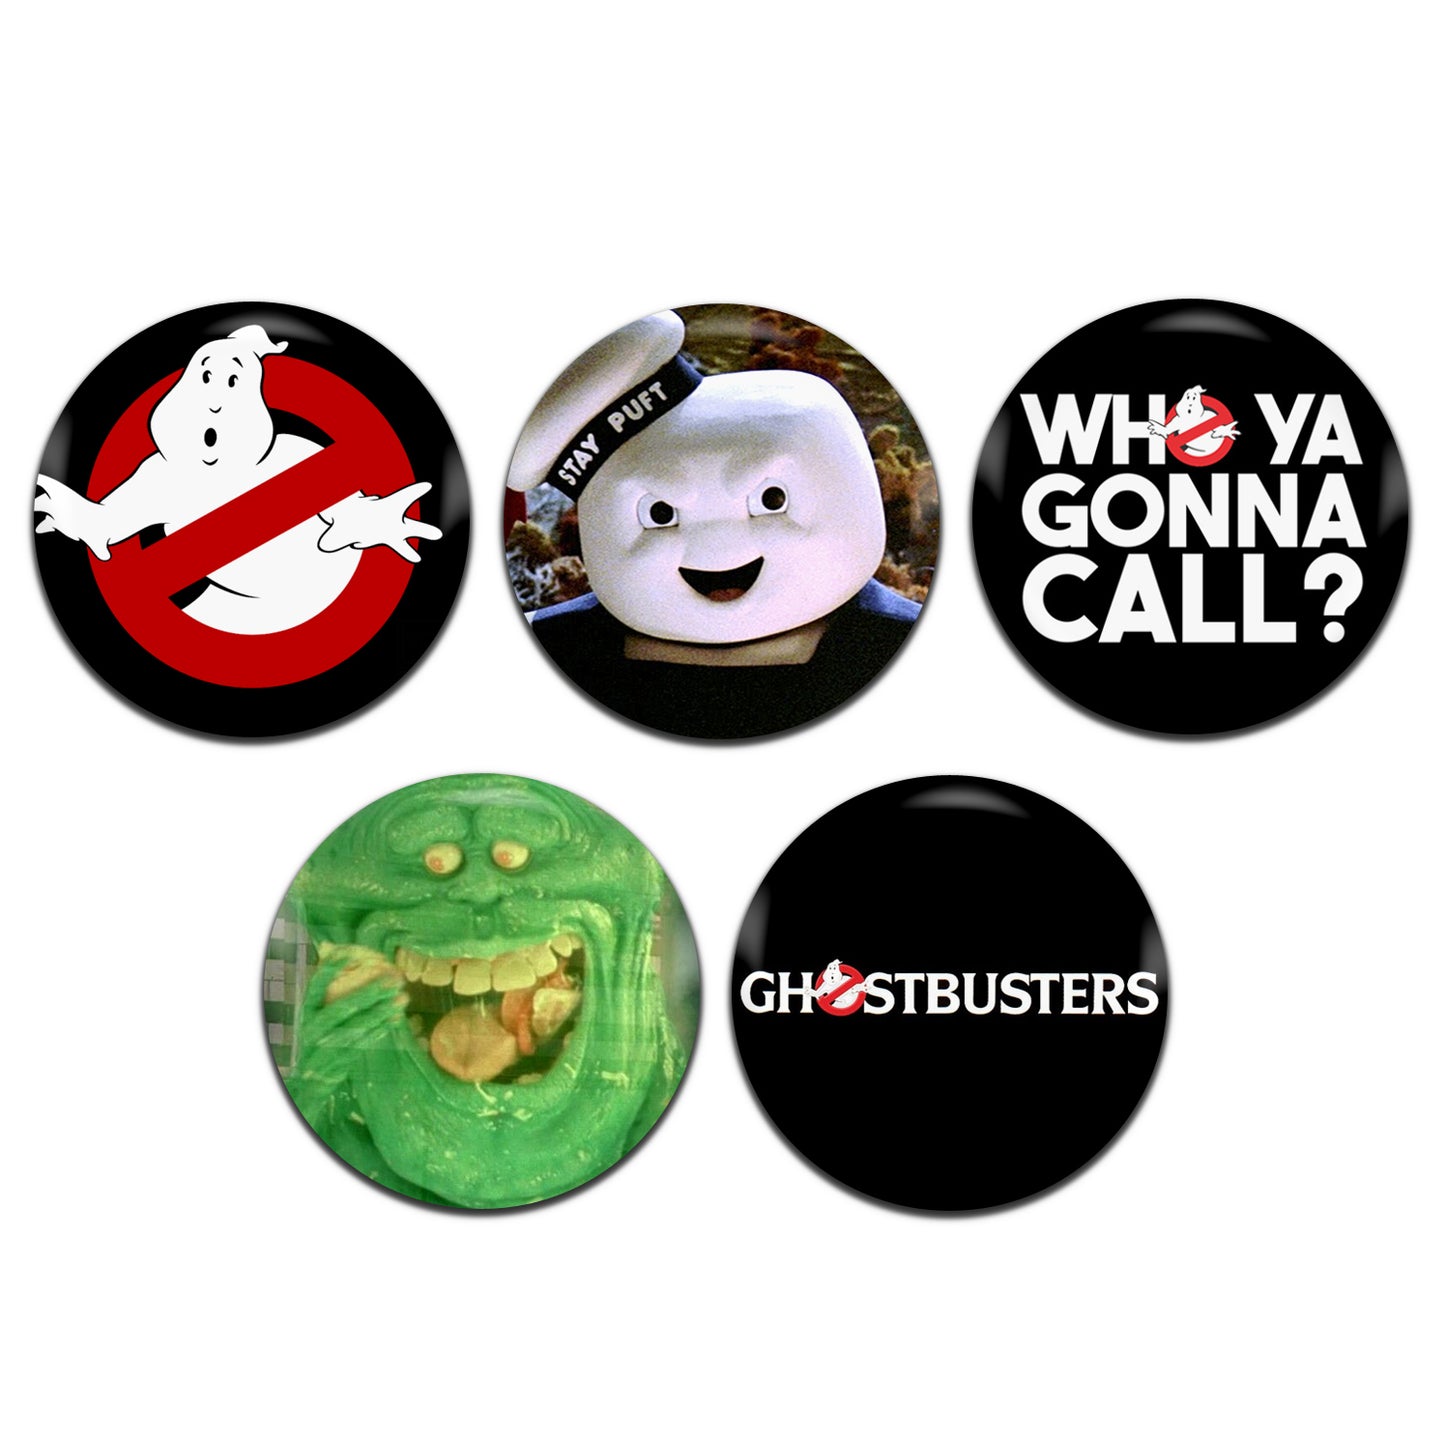 Ghostbusters Movie Supernatural Comedy Horror Film 80's 25mm / 1 Inch D-Pin Button Badges (5x Set)